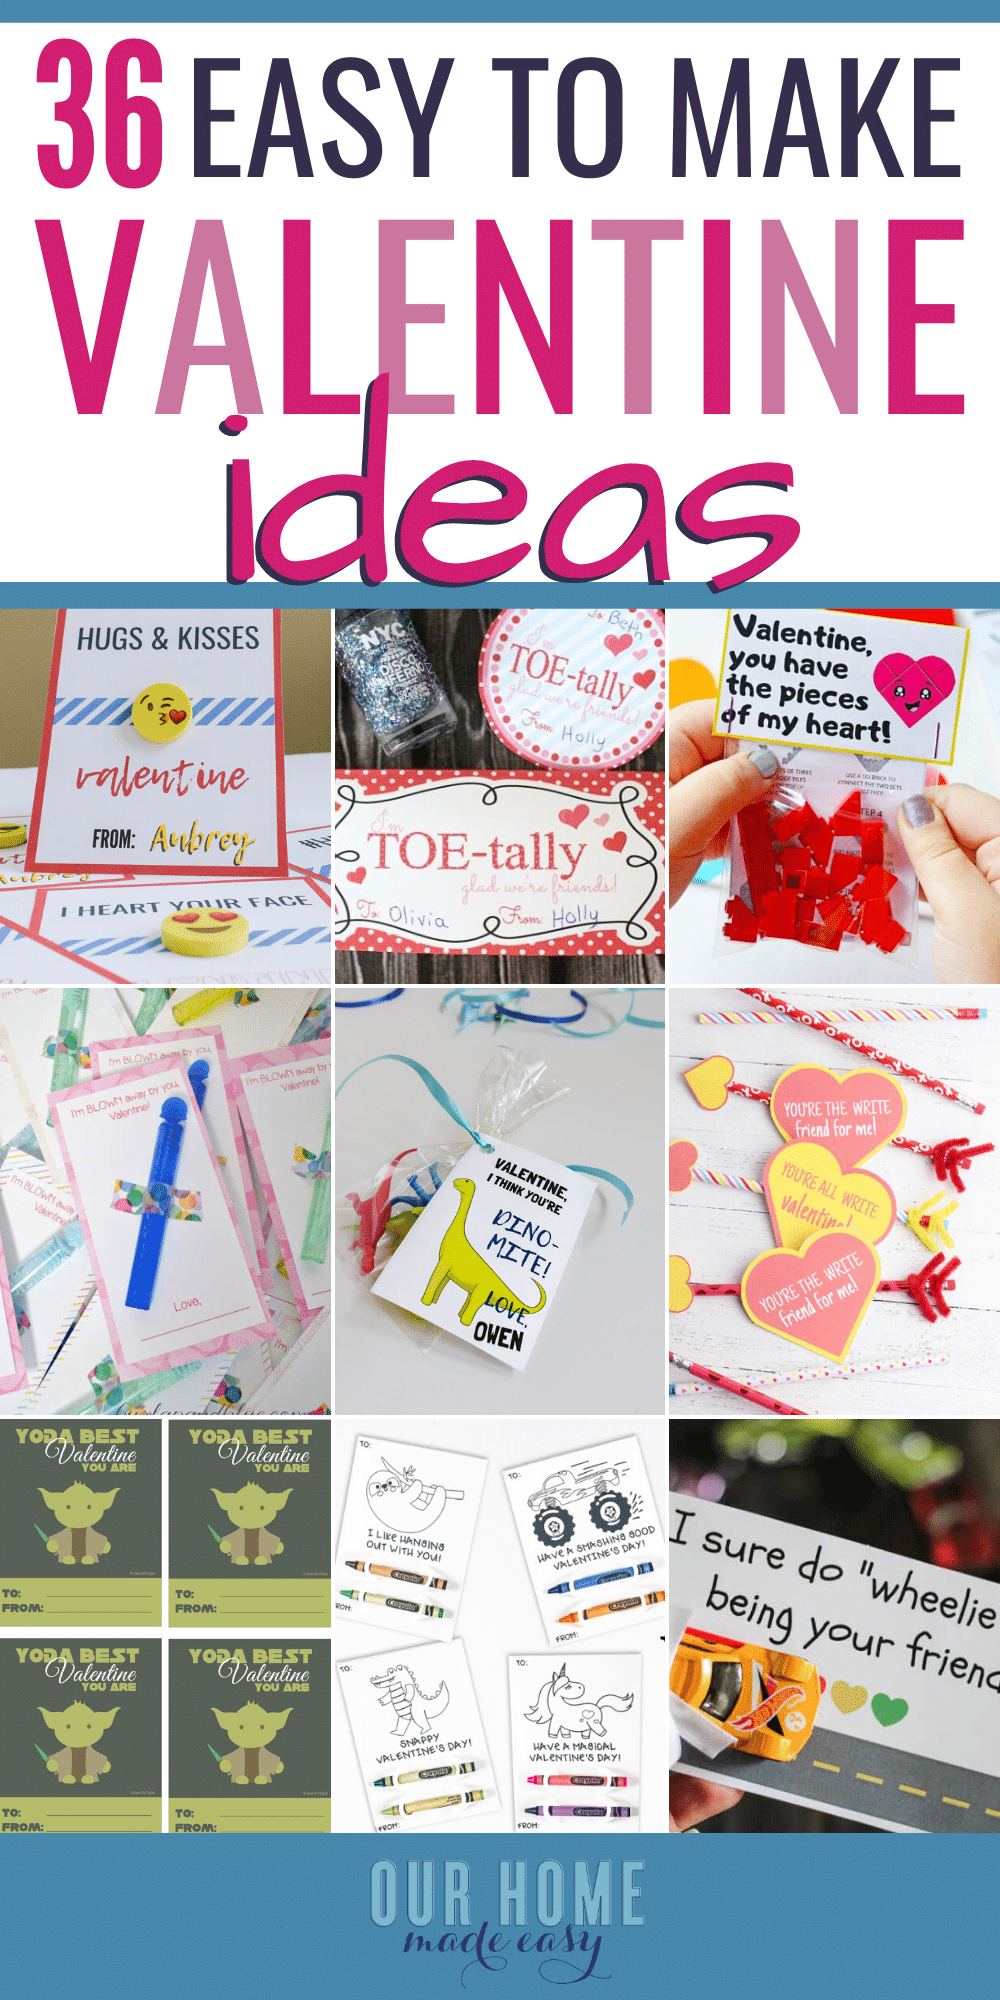 36 Non Candy Kids Valentines Ideas for School – Our Home Made Easy